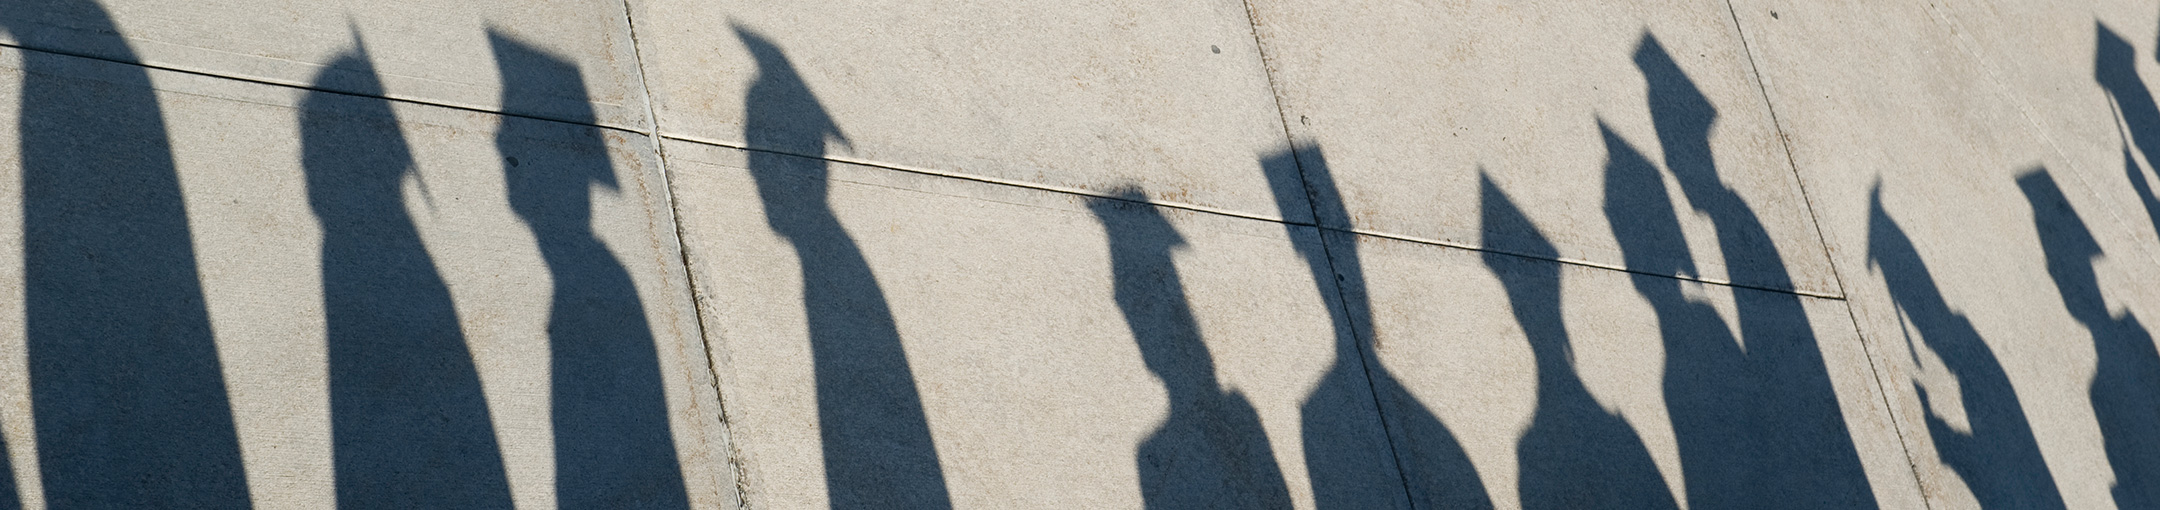 Shadows of students in graduation clothing.